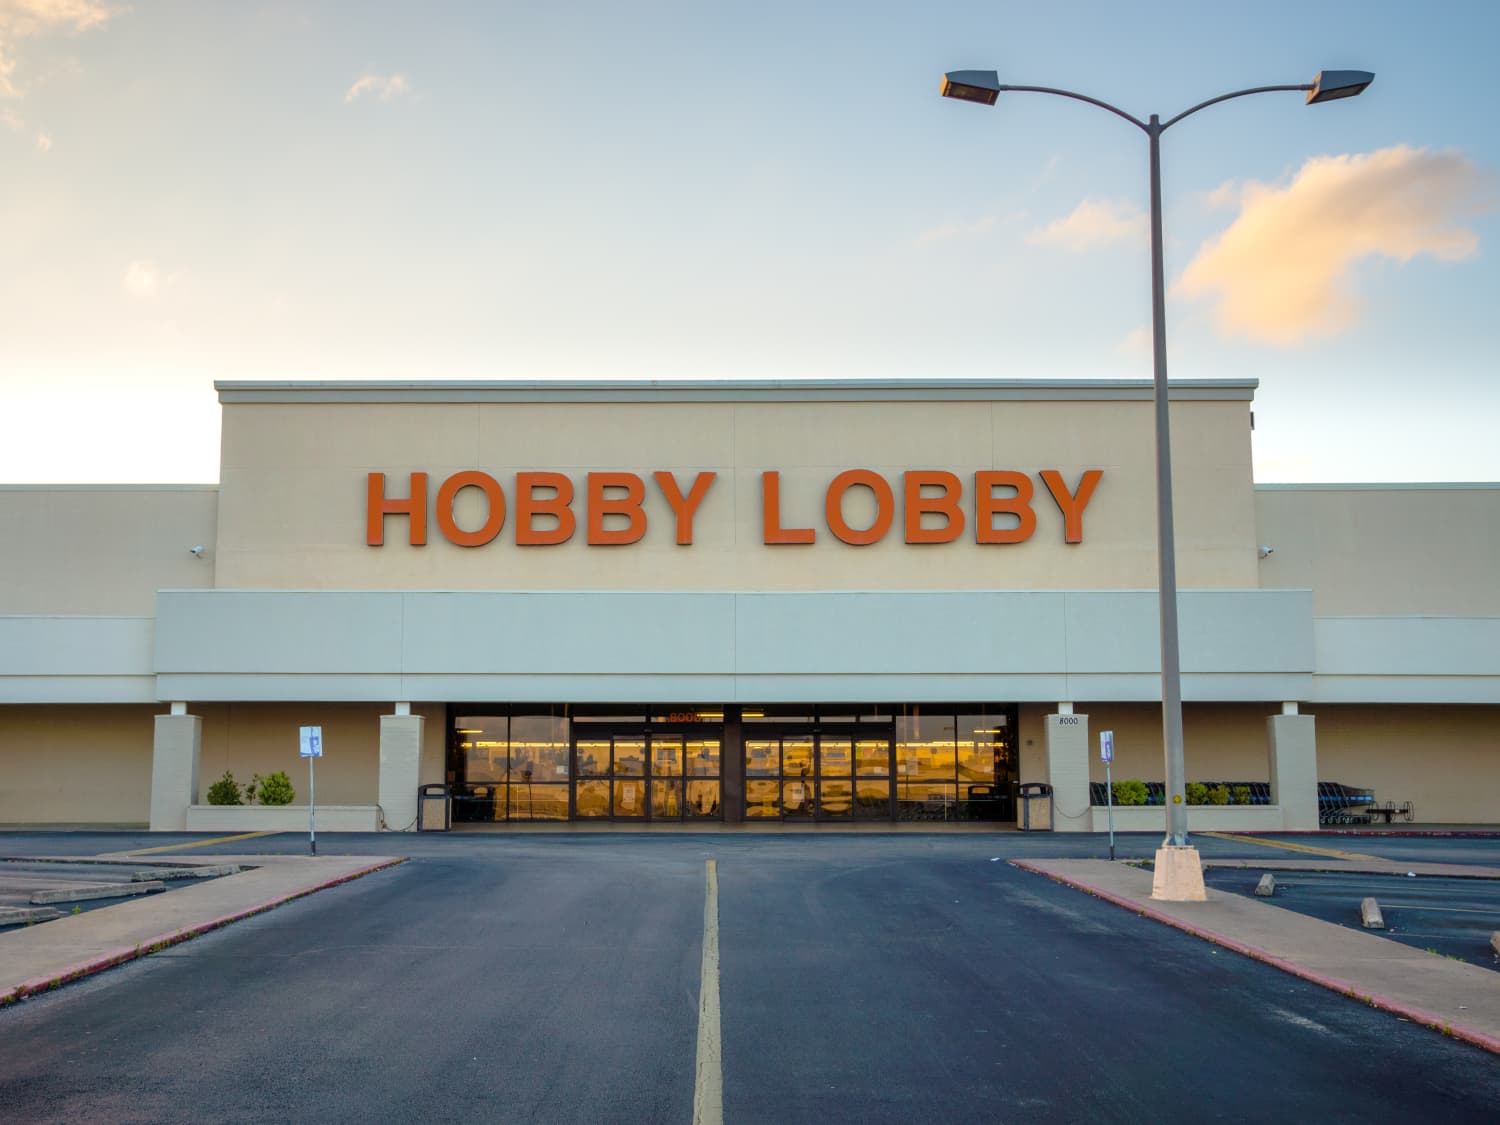 Hunting for a Hobby Lobby Coupon? Here are 9 Tips to Save!